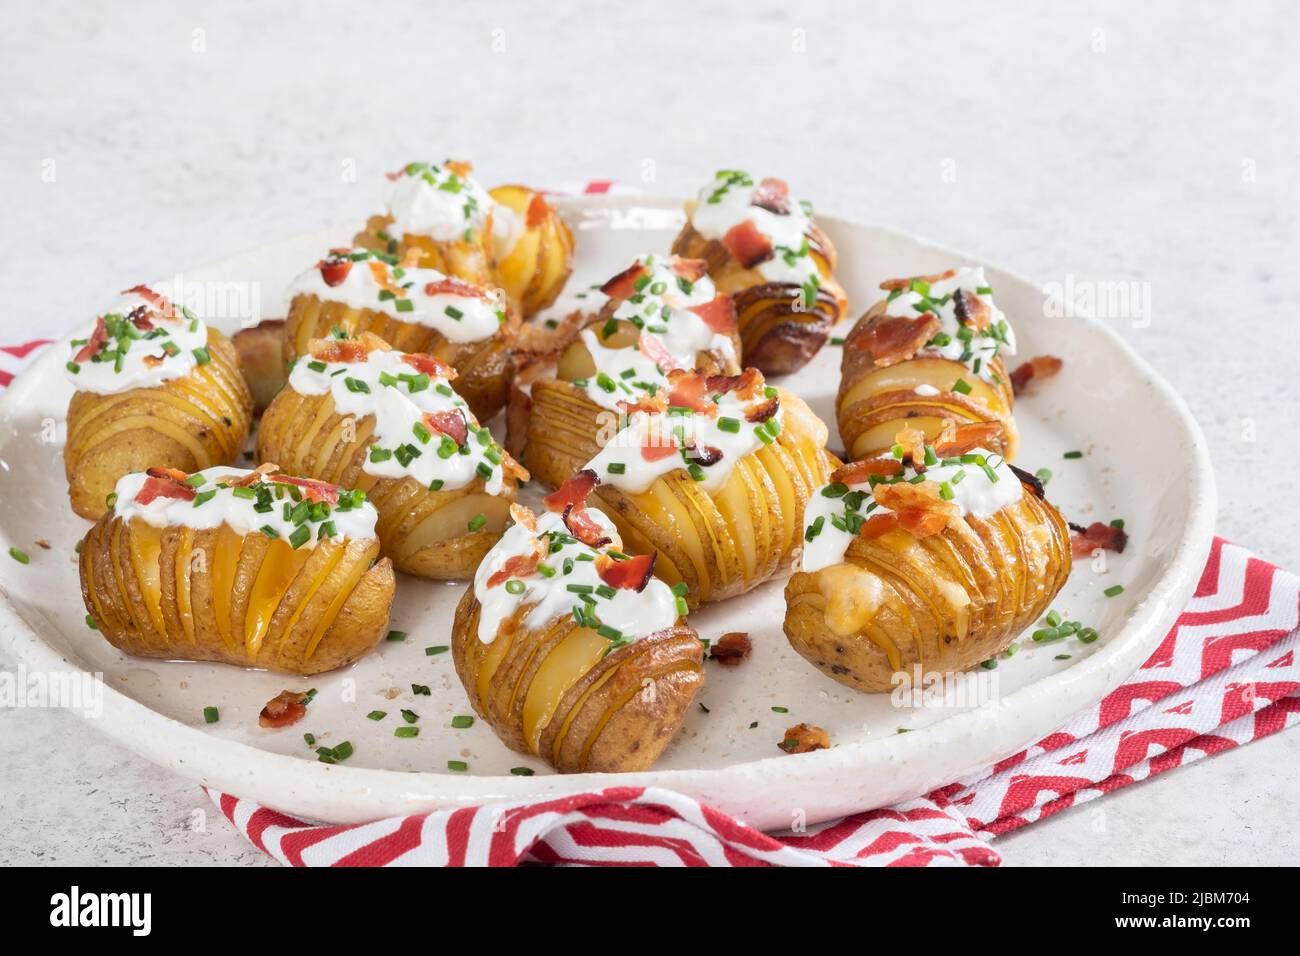 baked potato stuffed with cheese, bacon and sour cream. loaded hasselback potatoes Stock Photo